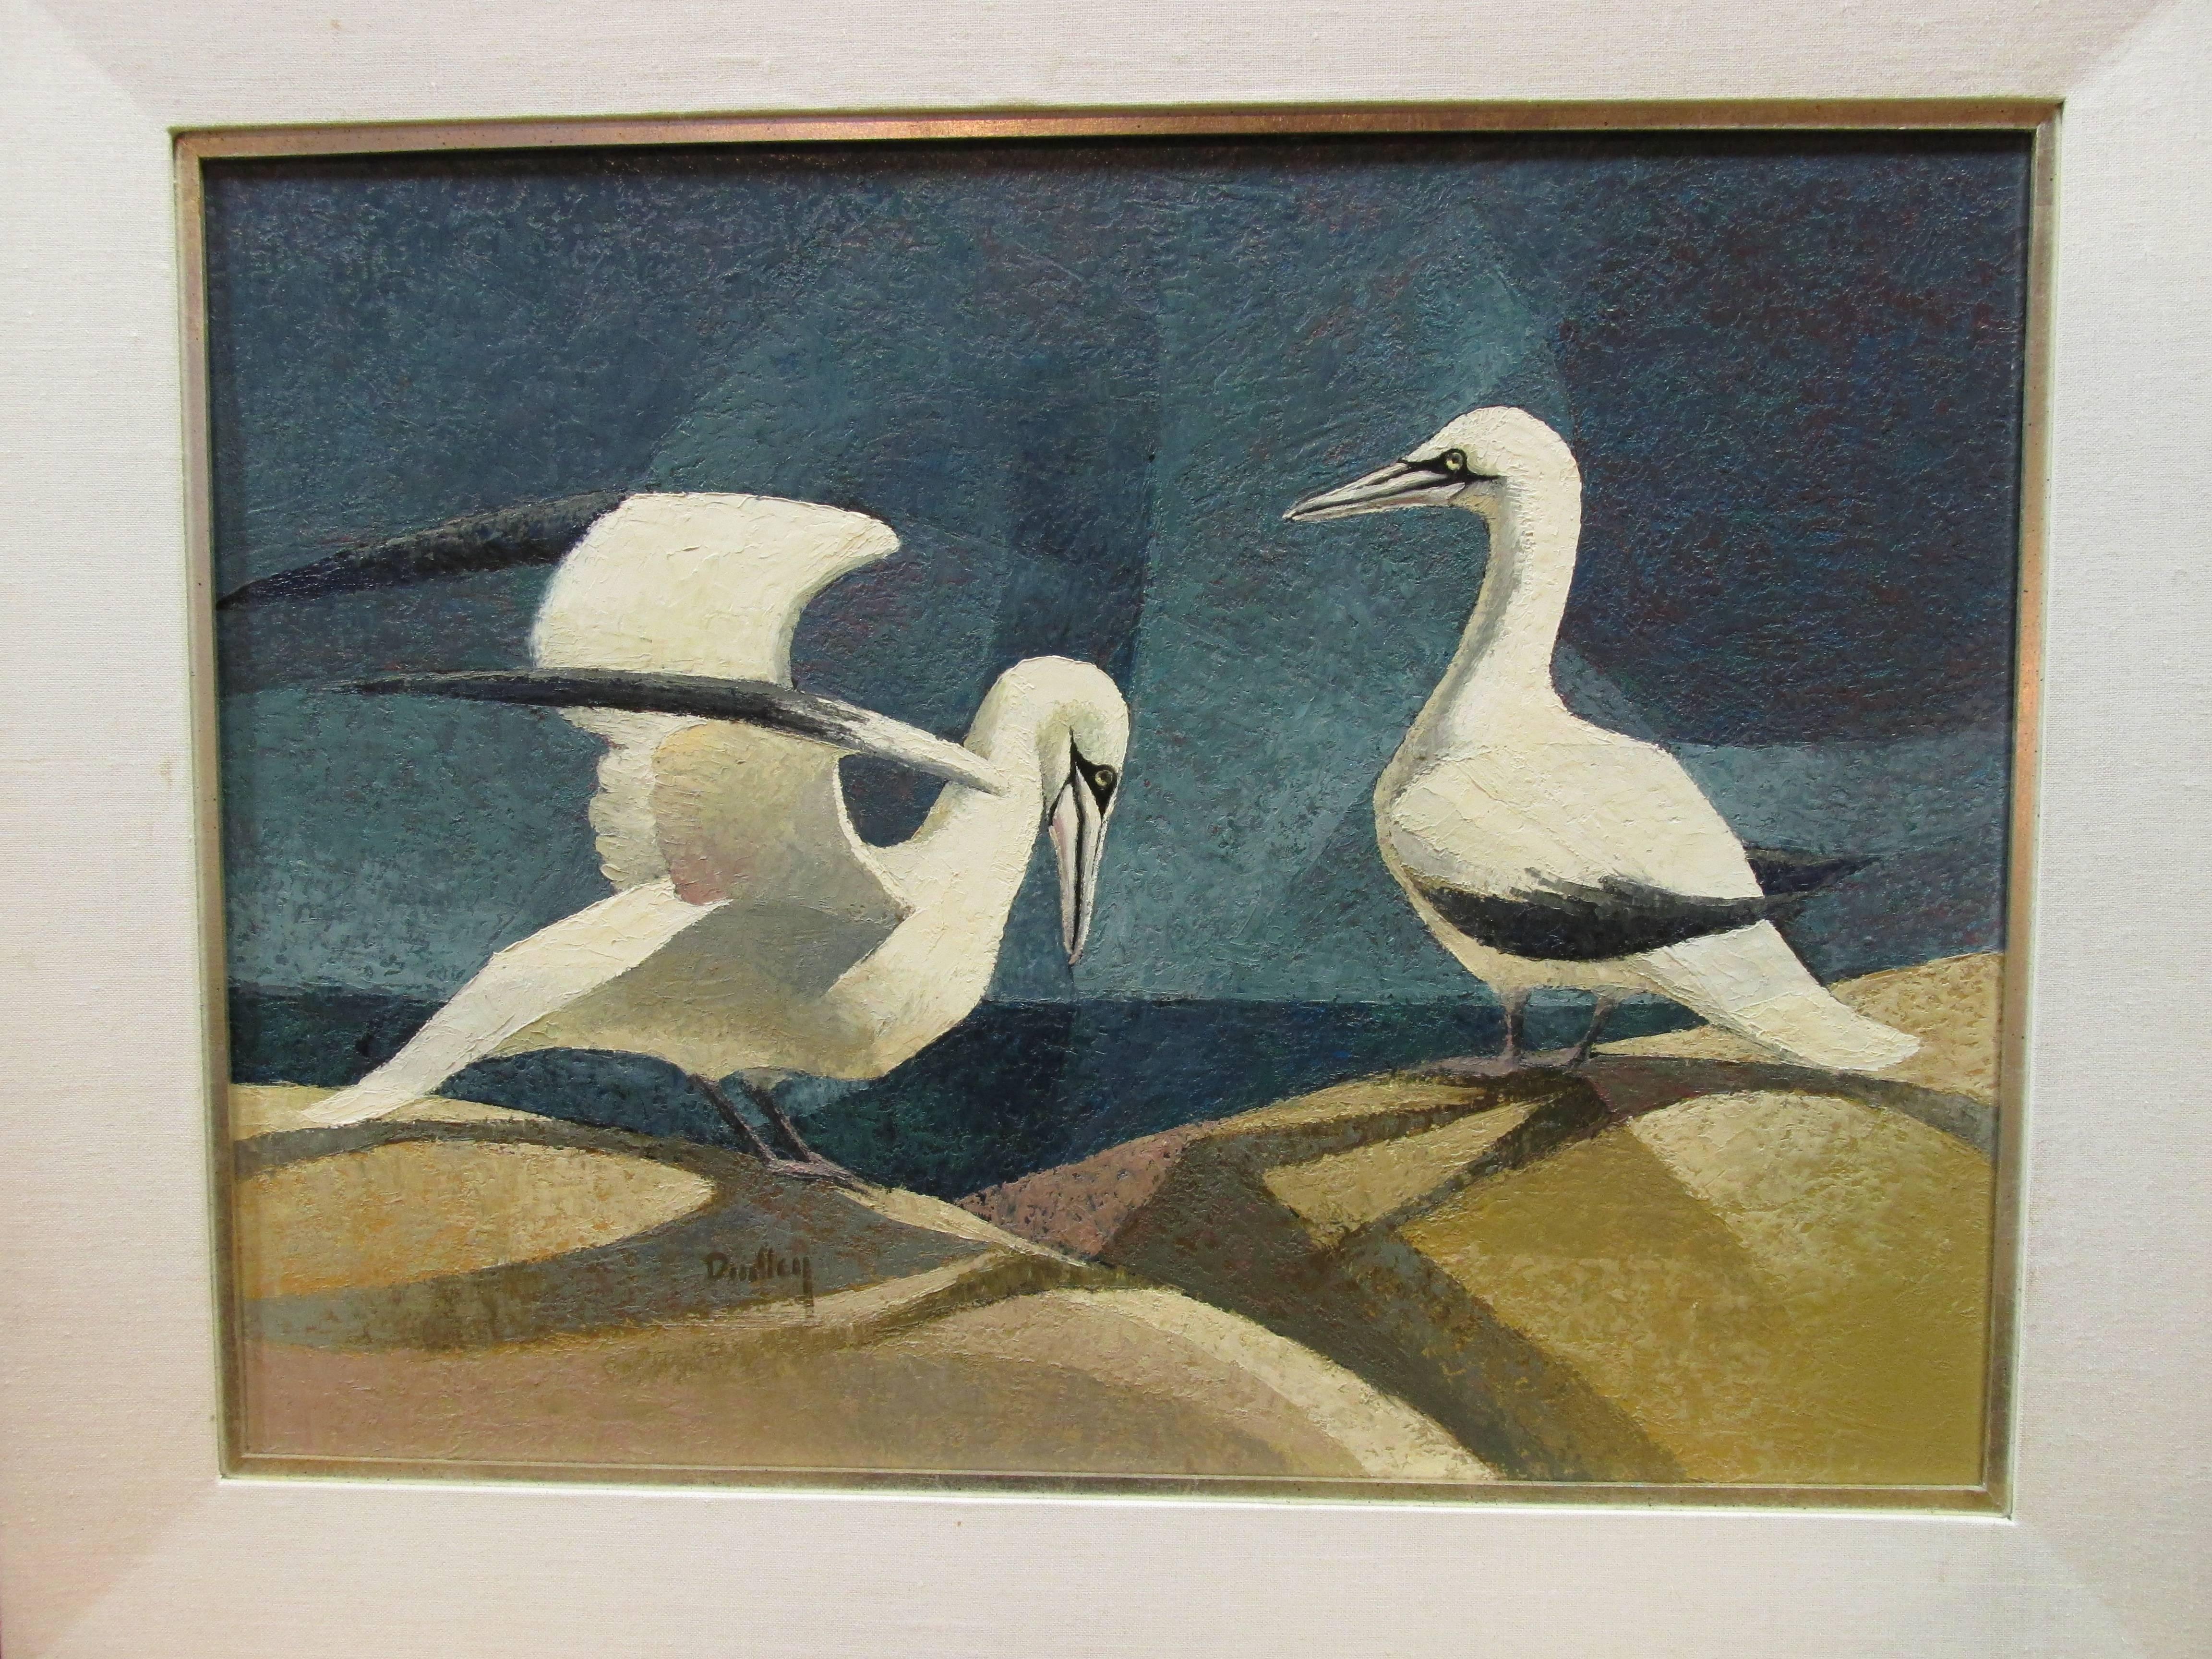 Cubism painting depicting two birds, seagulls, by California Artist Jack Dudley, (1918-1996). Signed lower left. Oil on reverse Masonite. Retains original frame. With frame measures 25.25